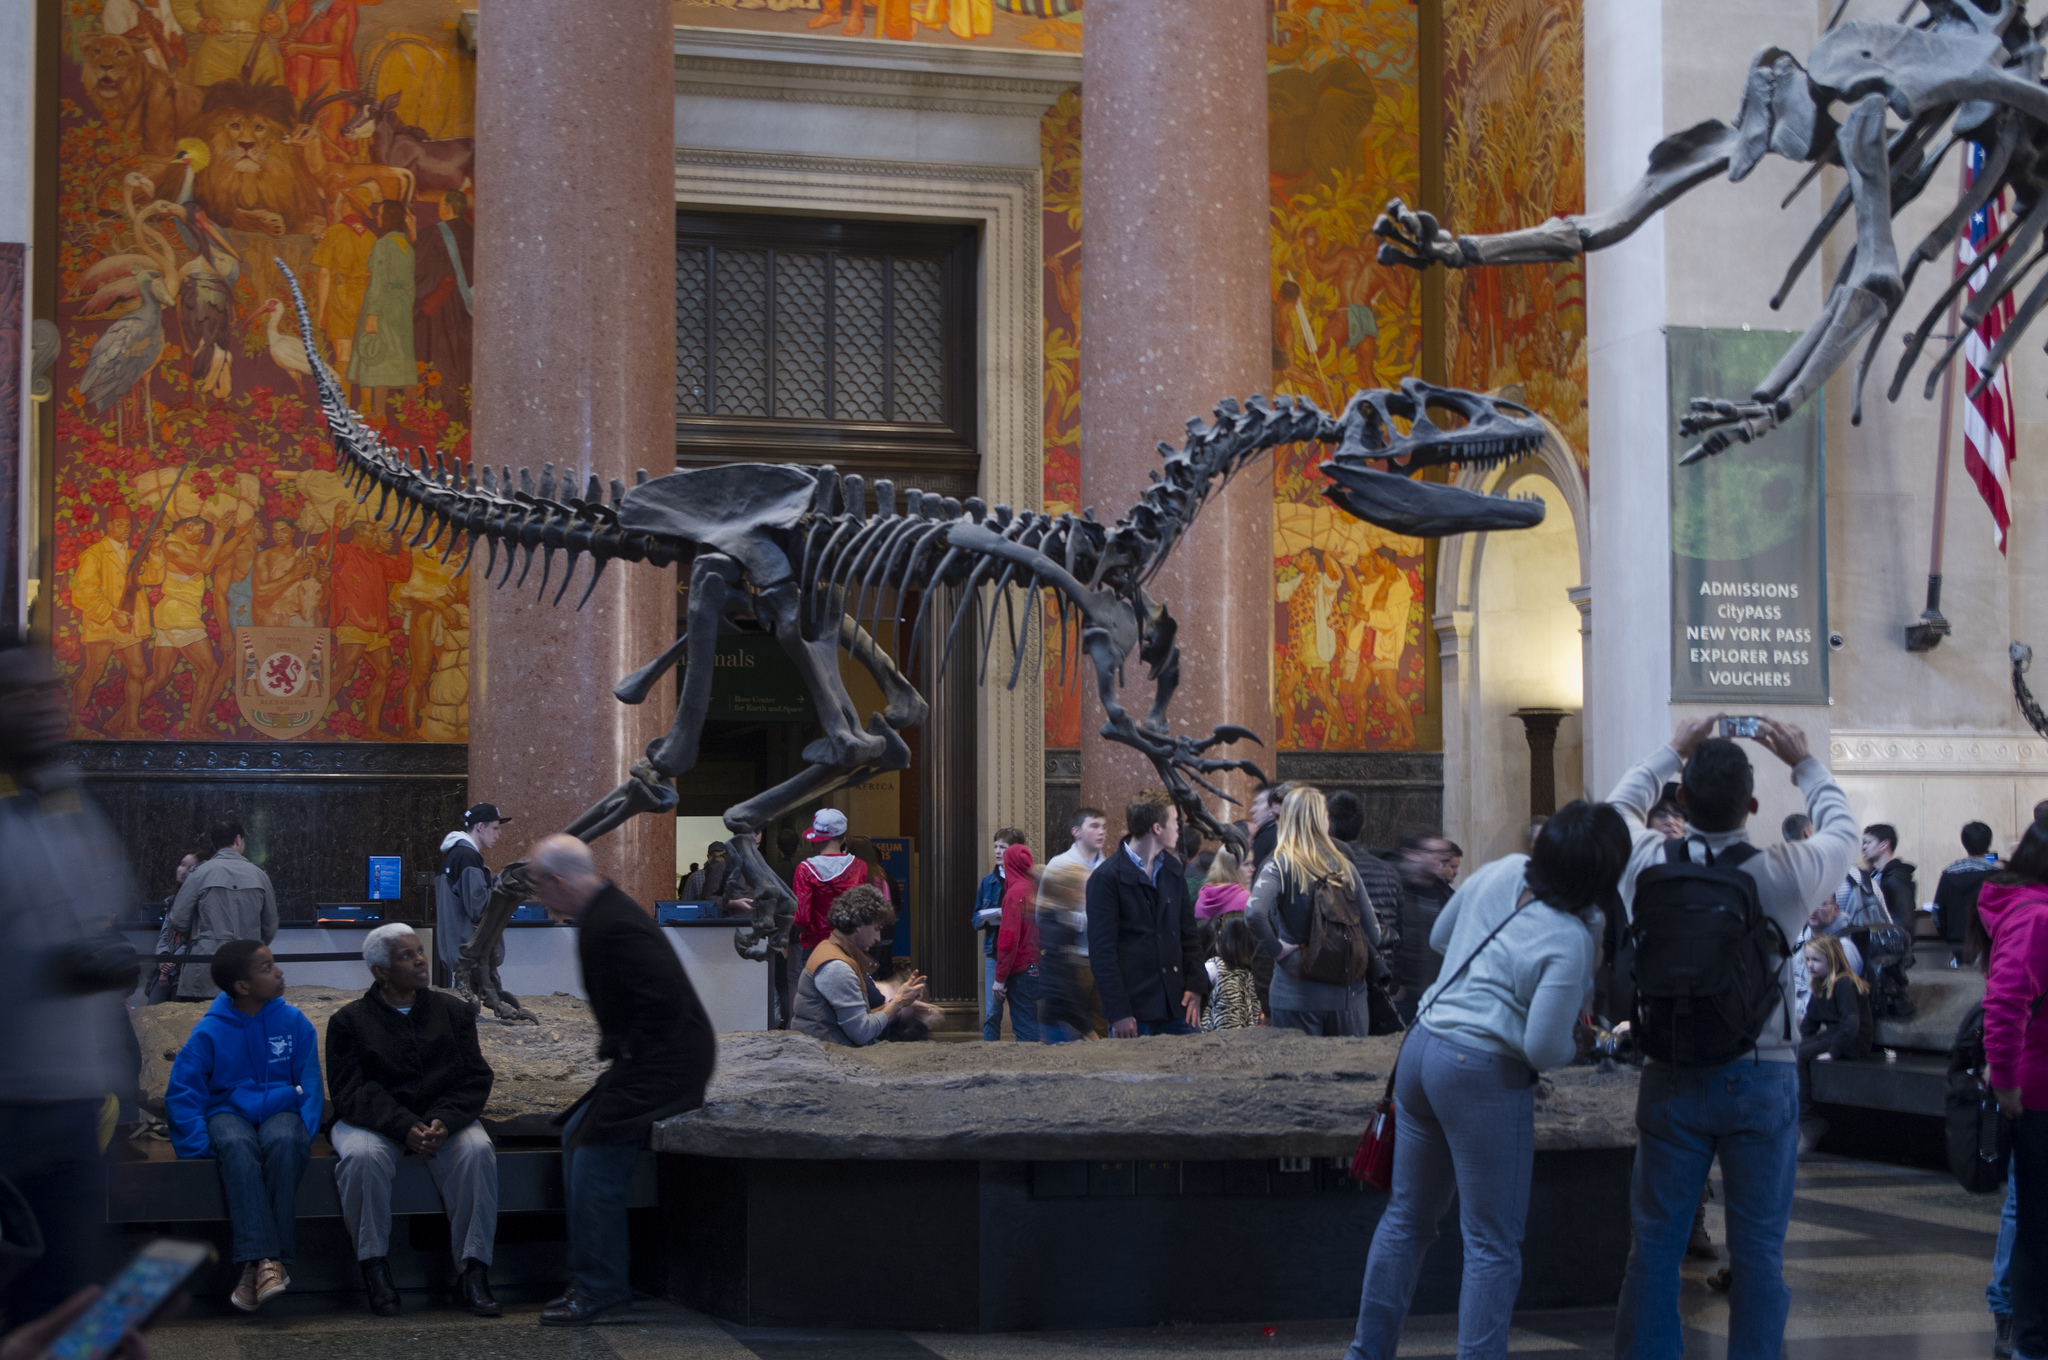 Dinosaur skeletons at American Museum Natural History. Photo by alphacityguides.